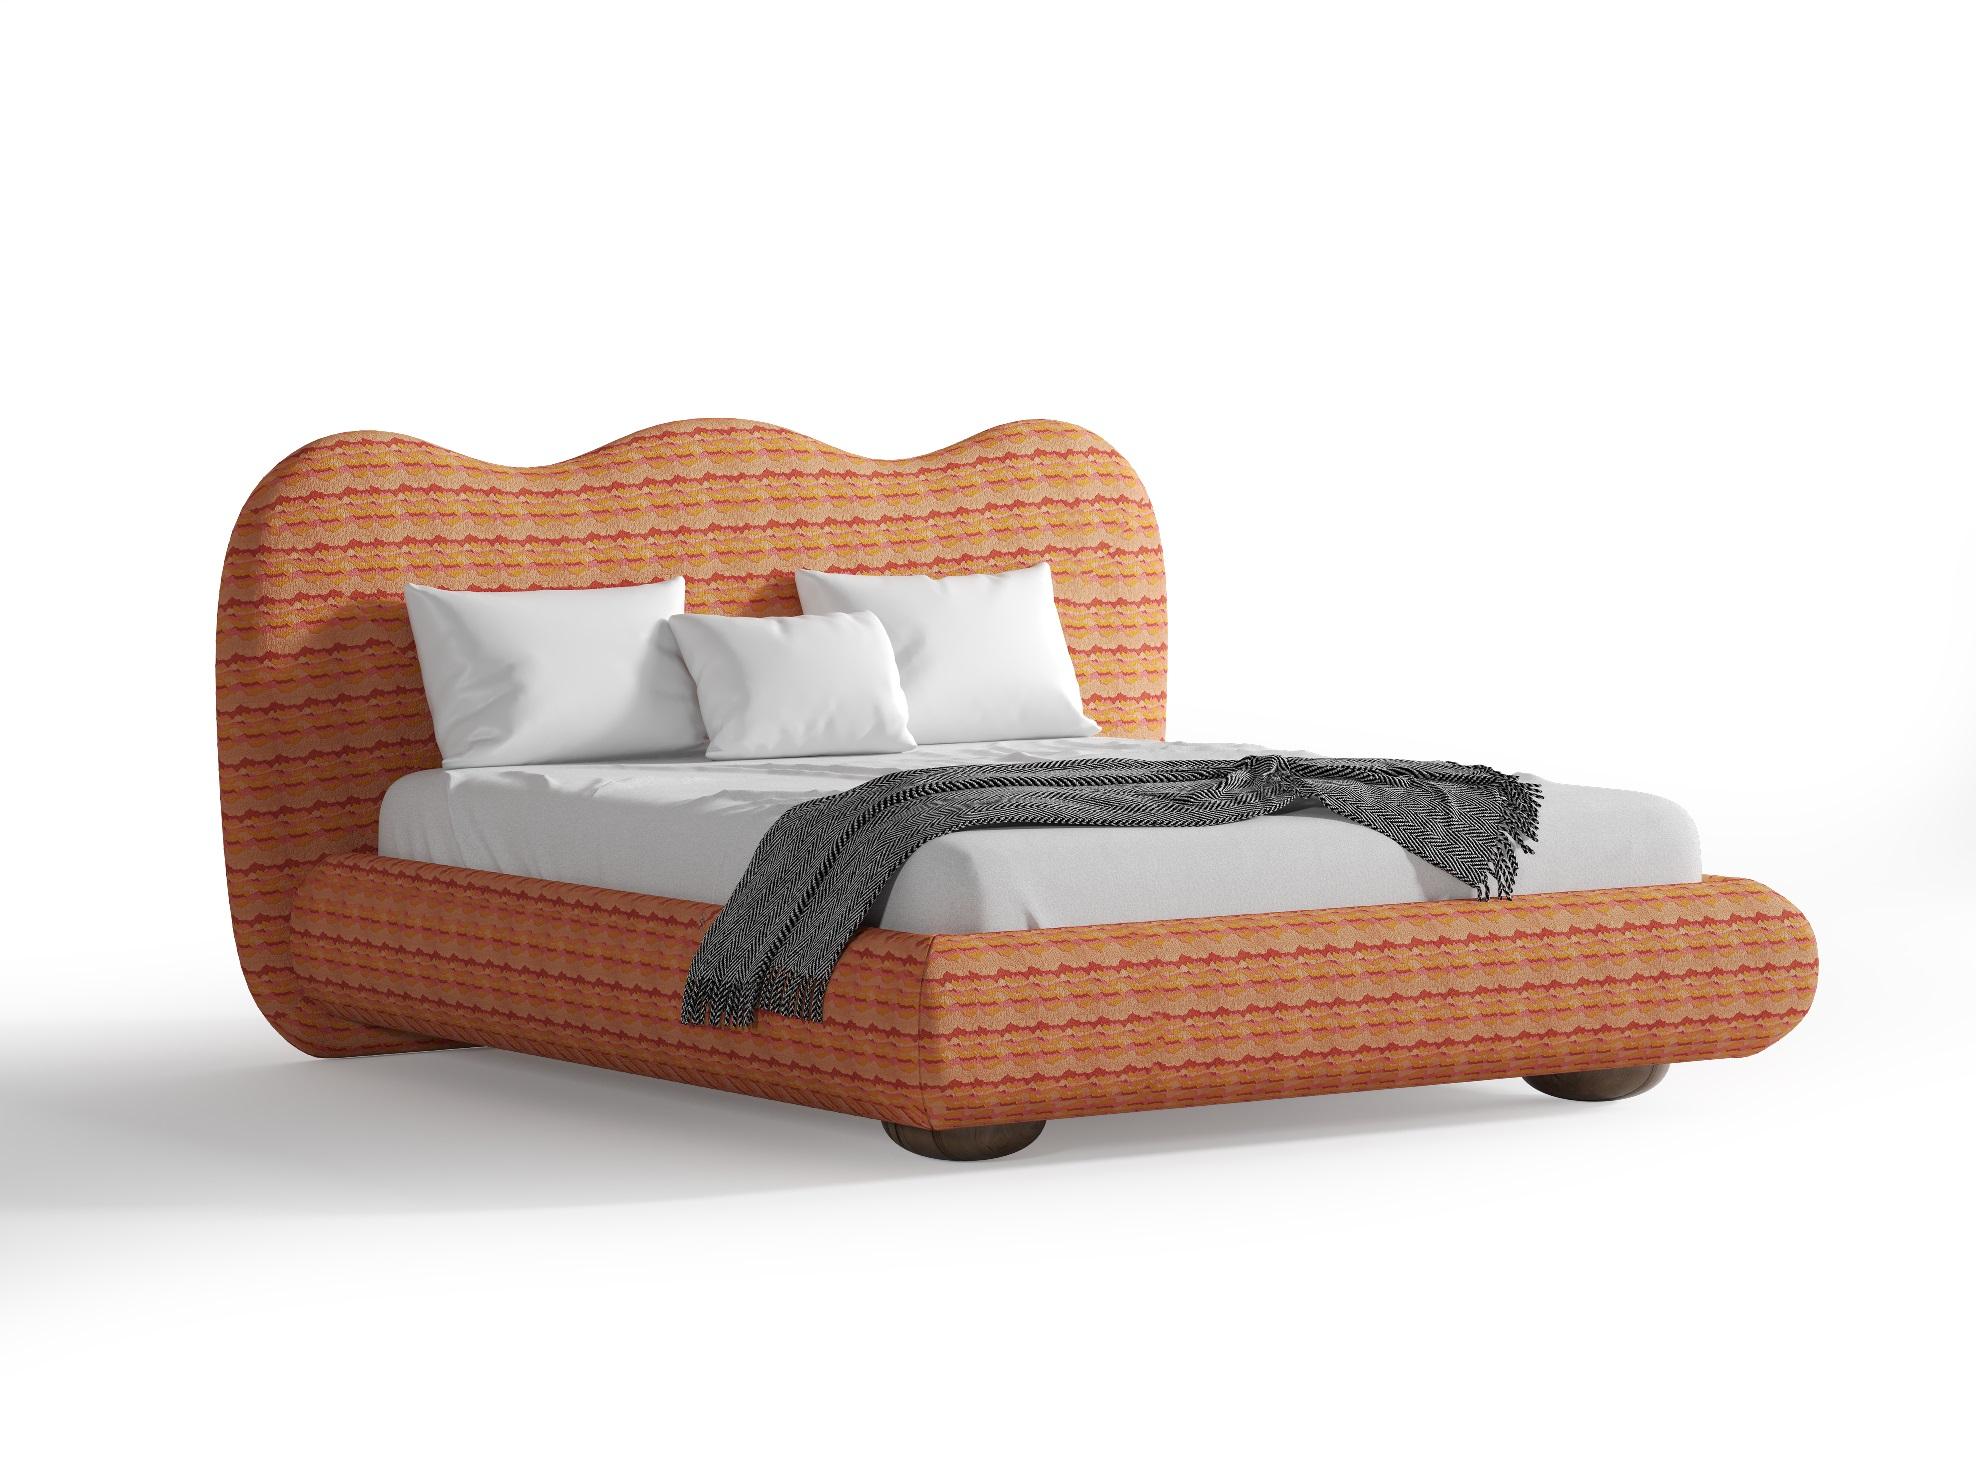 Modern Dandy King Size Bed Offered In Exclusive Pattern Fabric, 6 Colors For Sale